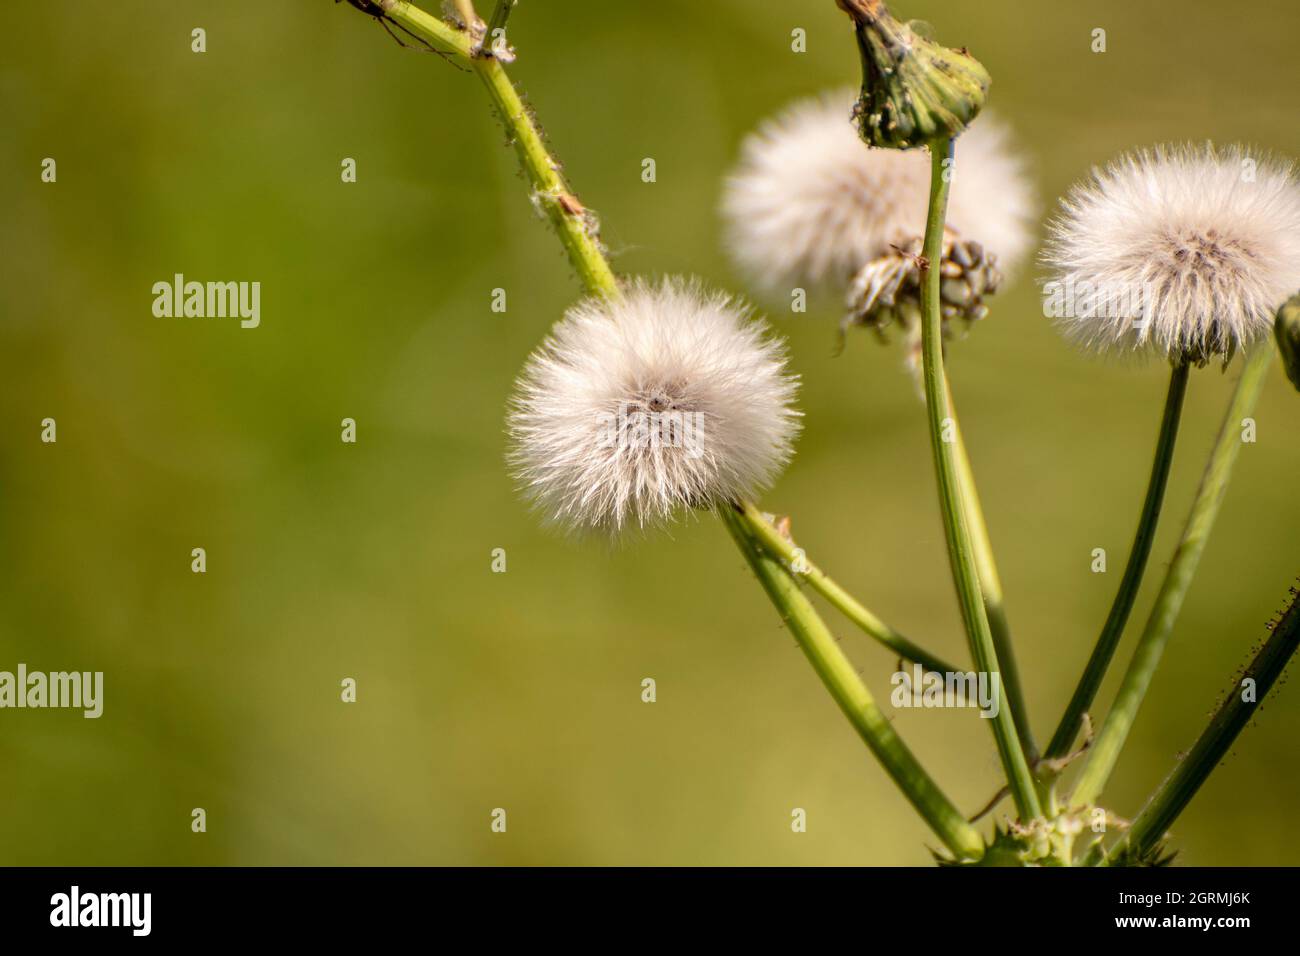 Sonchus oleraceus flowers in the foreground Stock Photo